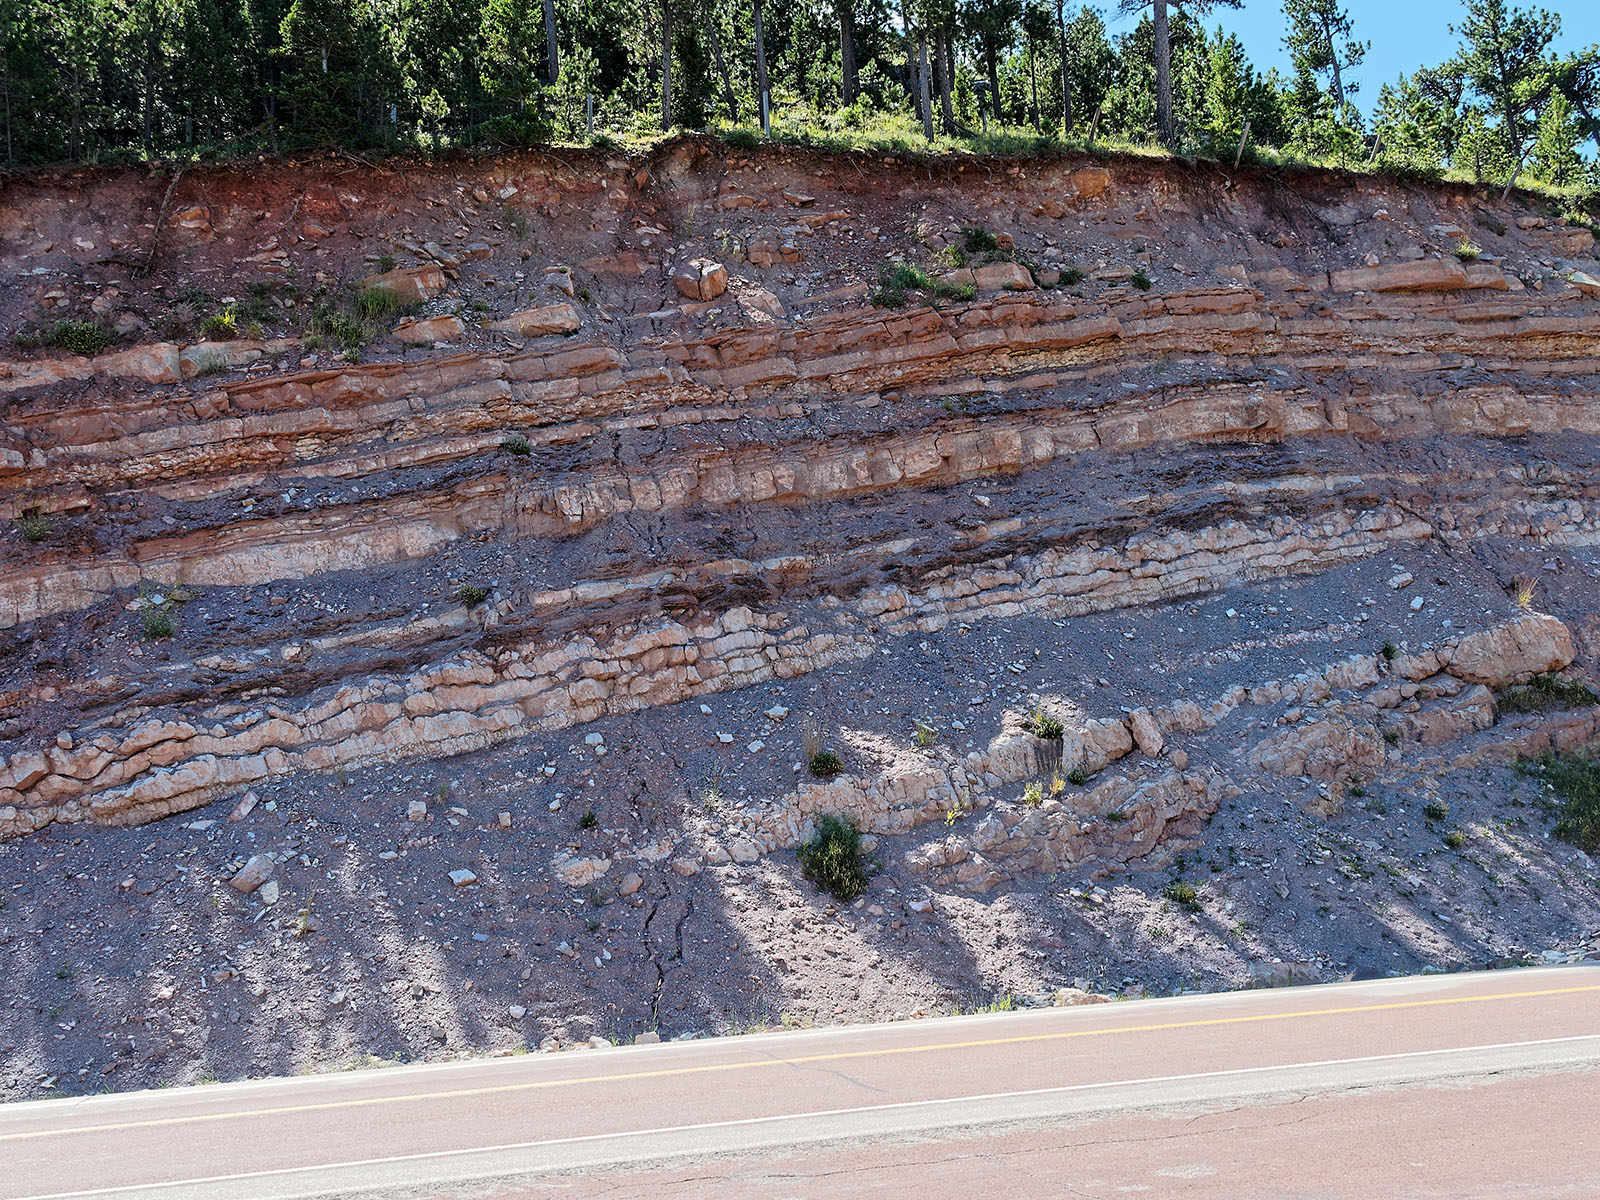 Road cut sedimentary layers from the Amsden formation (Pennsyvanian period 280-325 MA) composed of thin layers of red shale, limestone, dolomite, sandstone and siltstone deposited from the shallow overlying Western Interior Seaway.